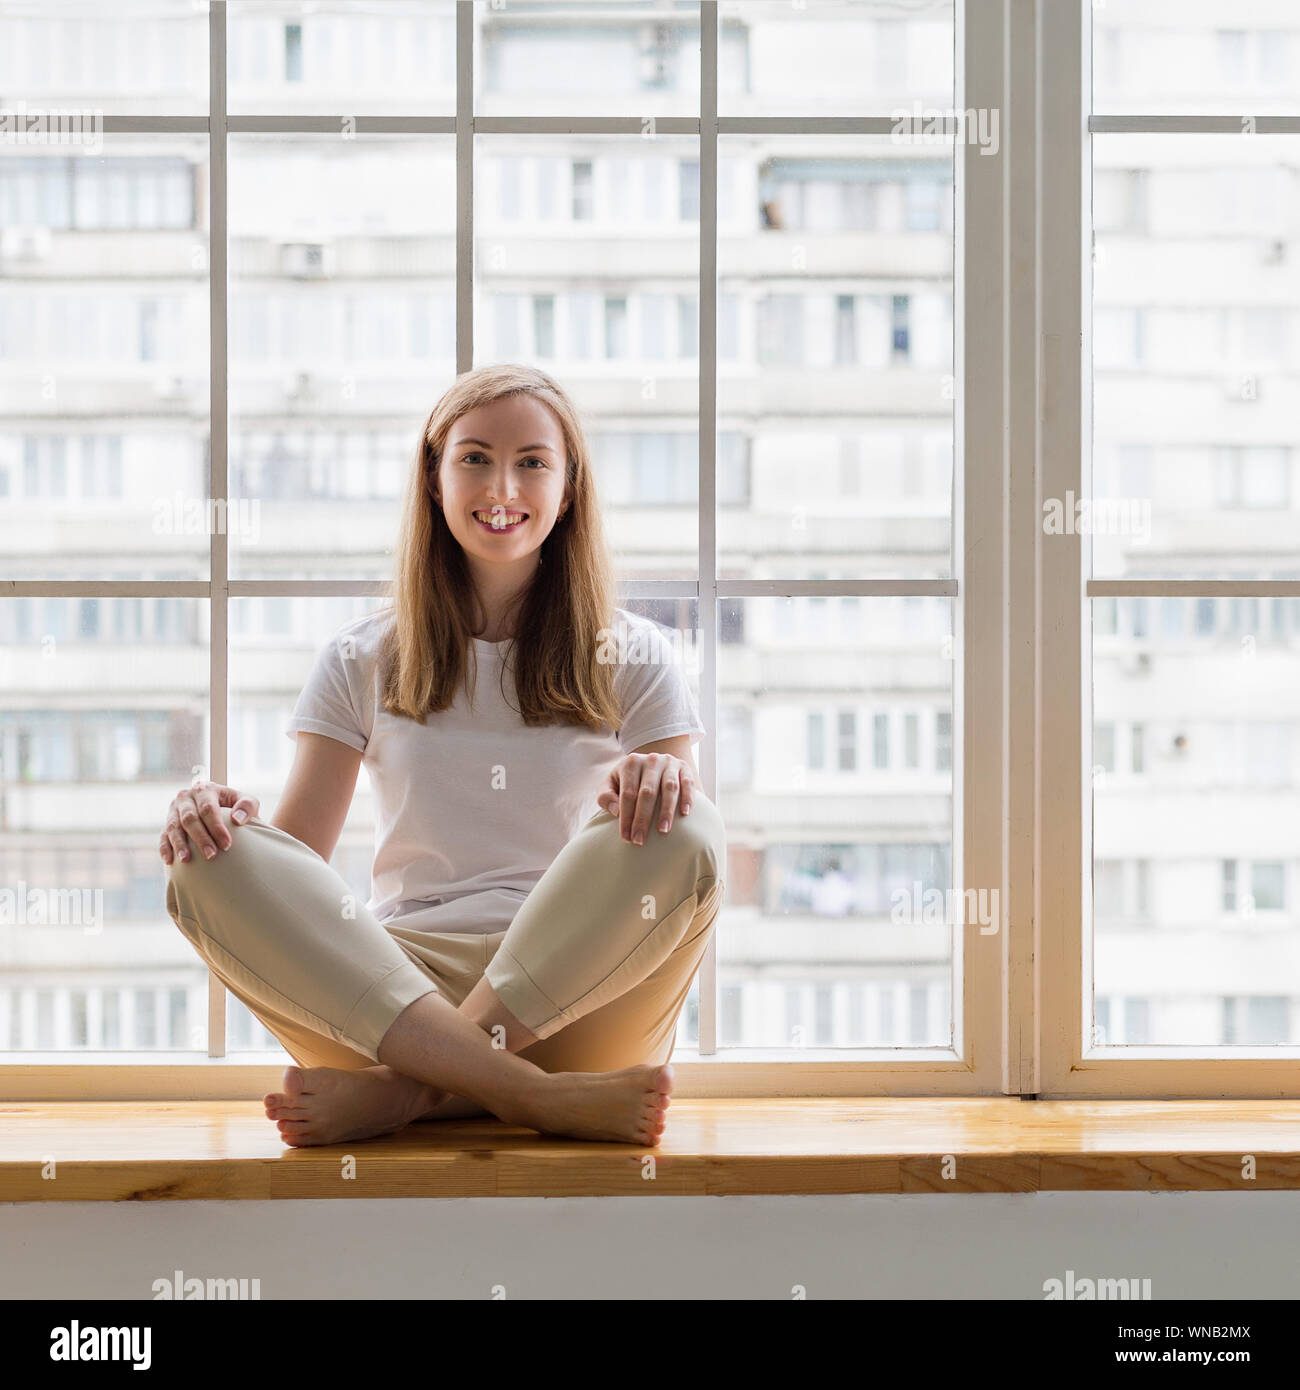 Young smiling woman sitting on window sill Stock Photo